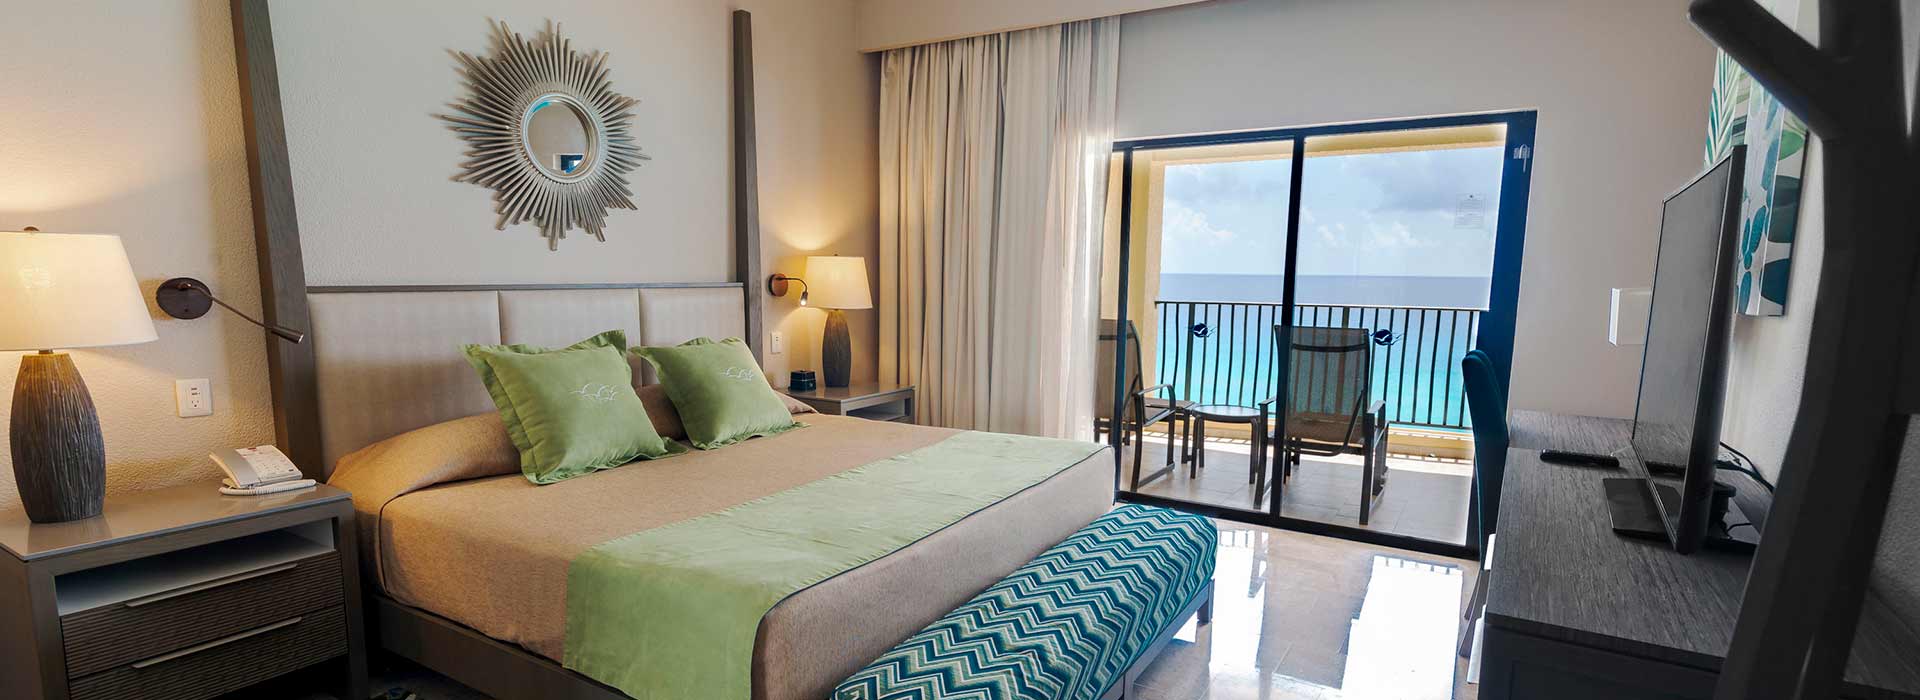 Beachfront villas one bedroom suite with full dining and living areas